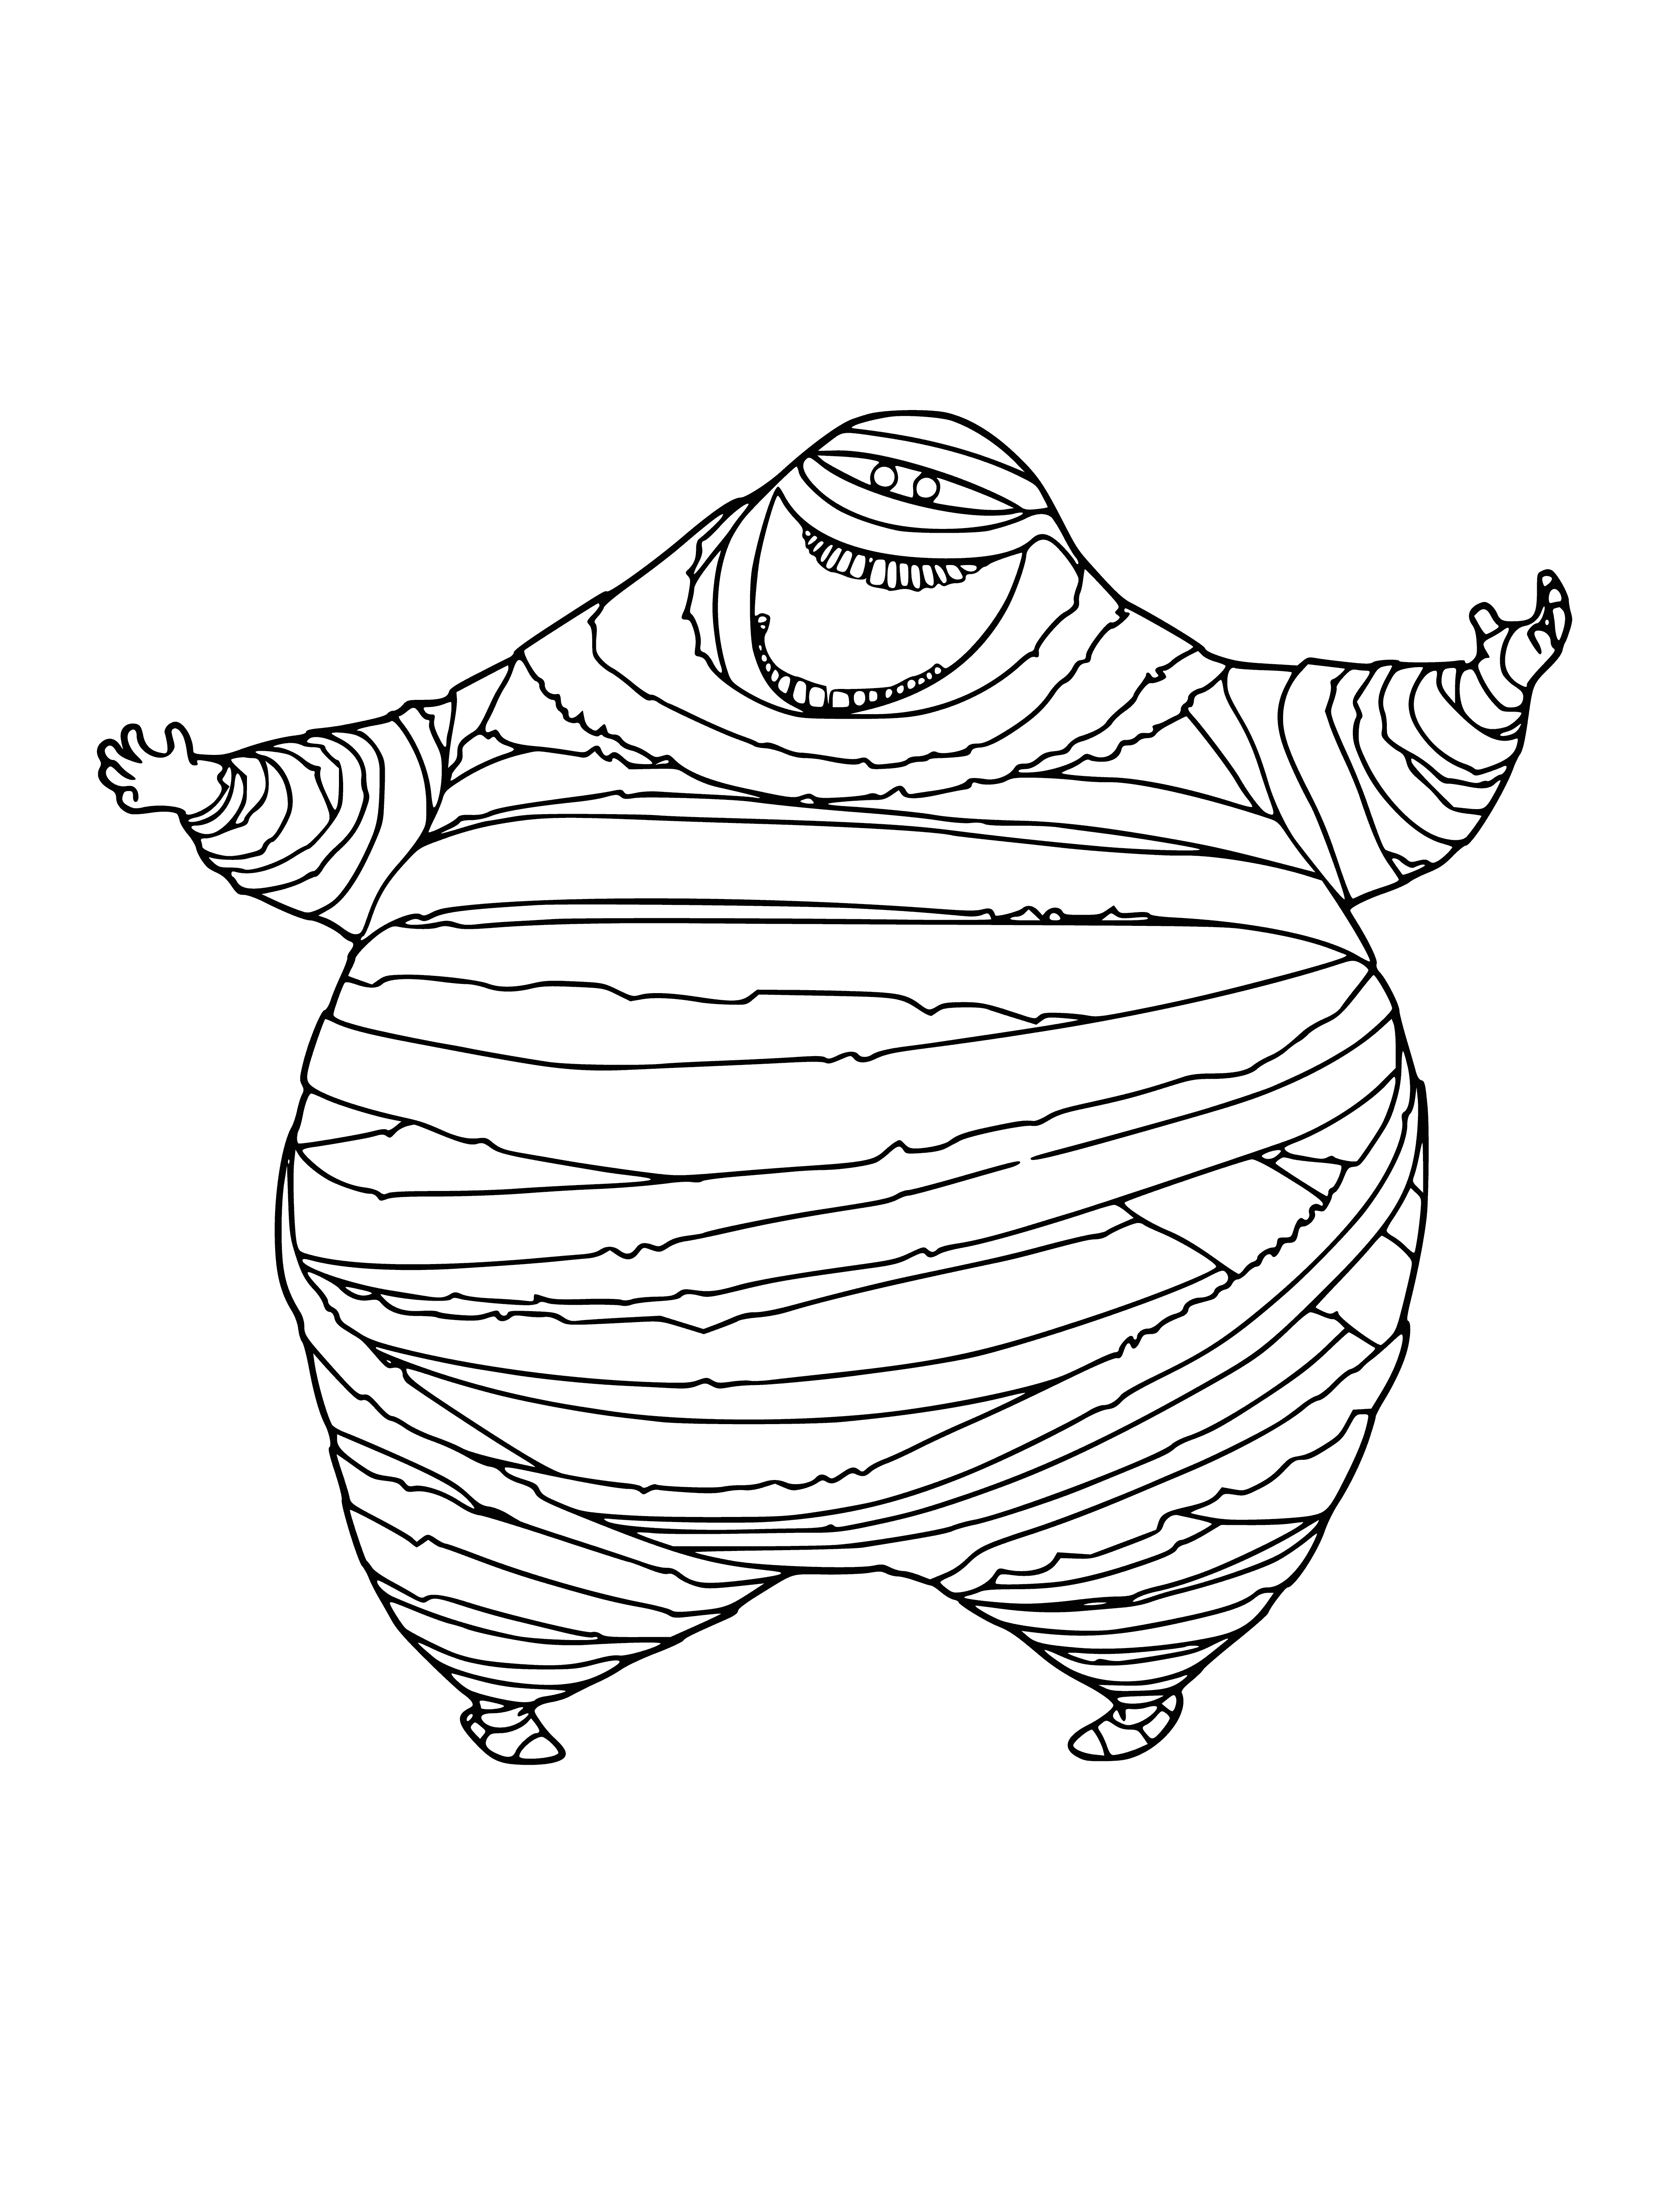 Mummy Murray coloring page